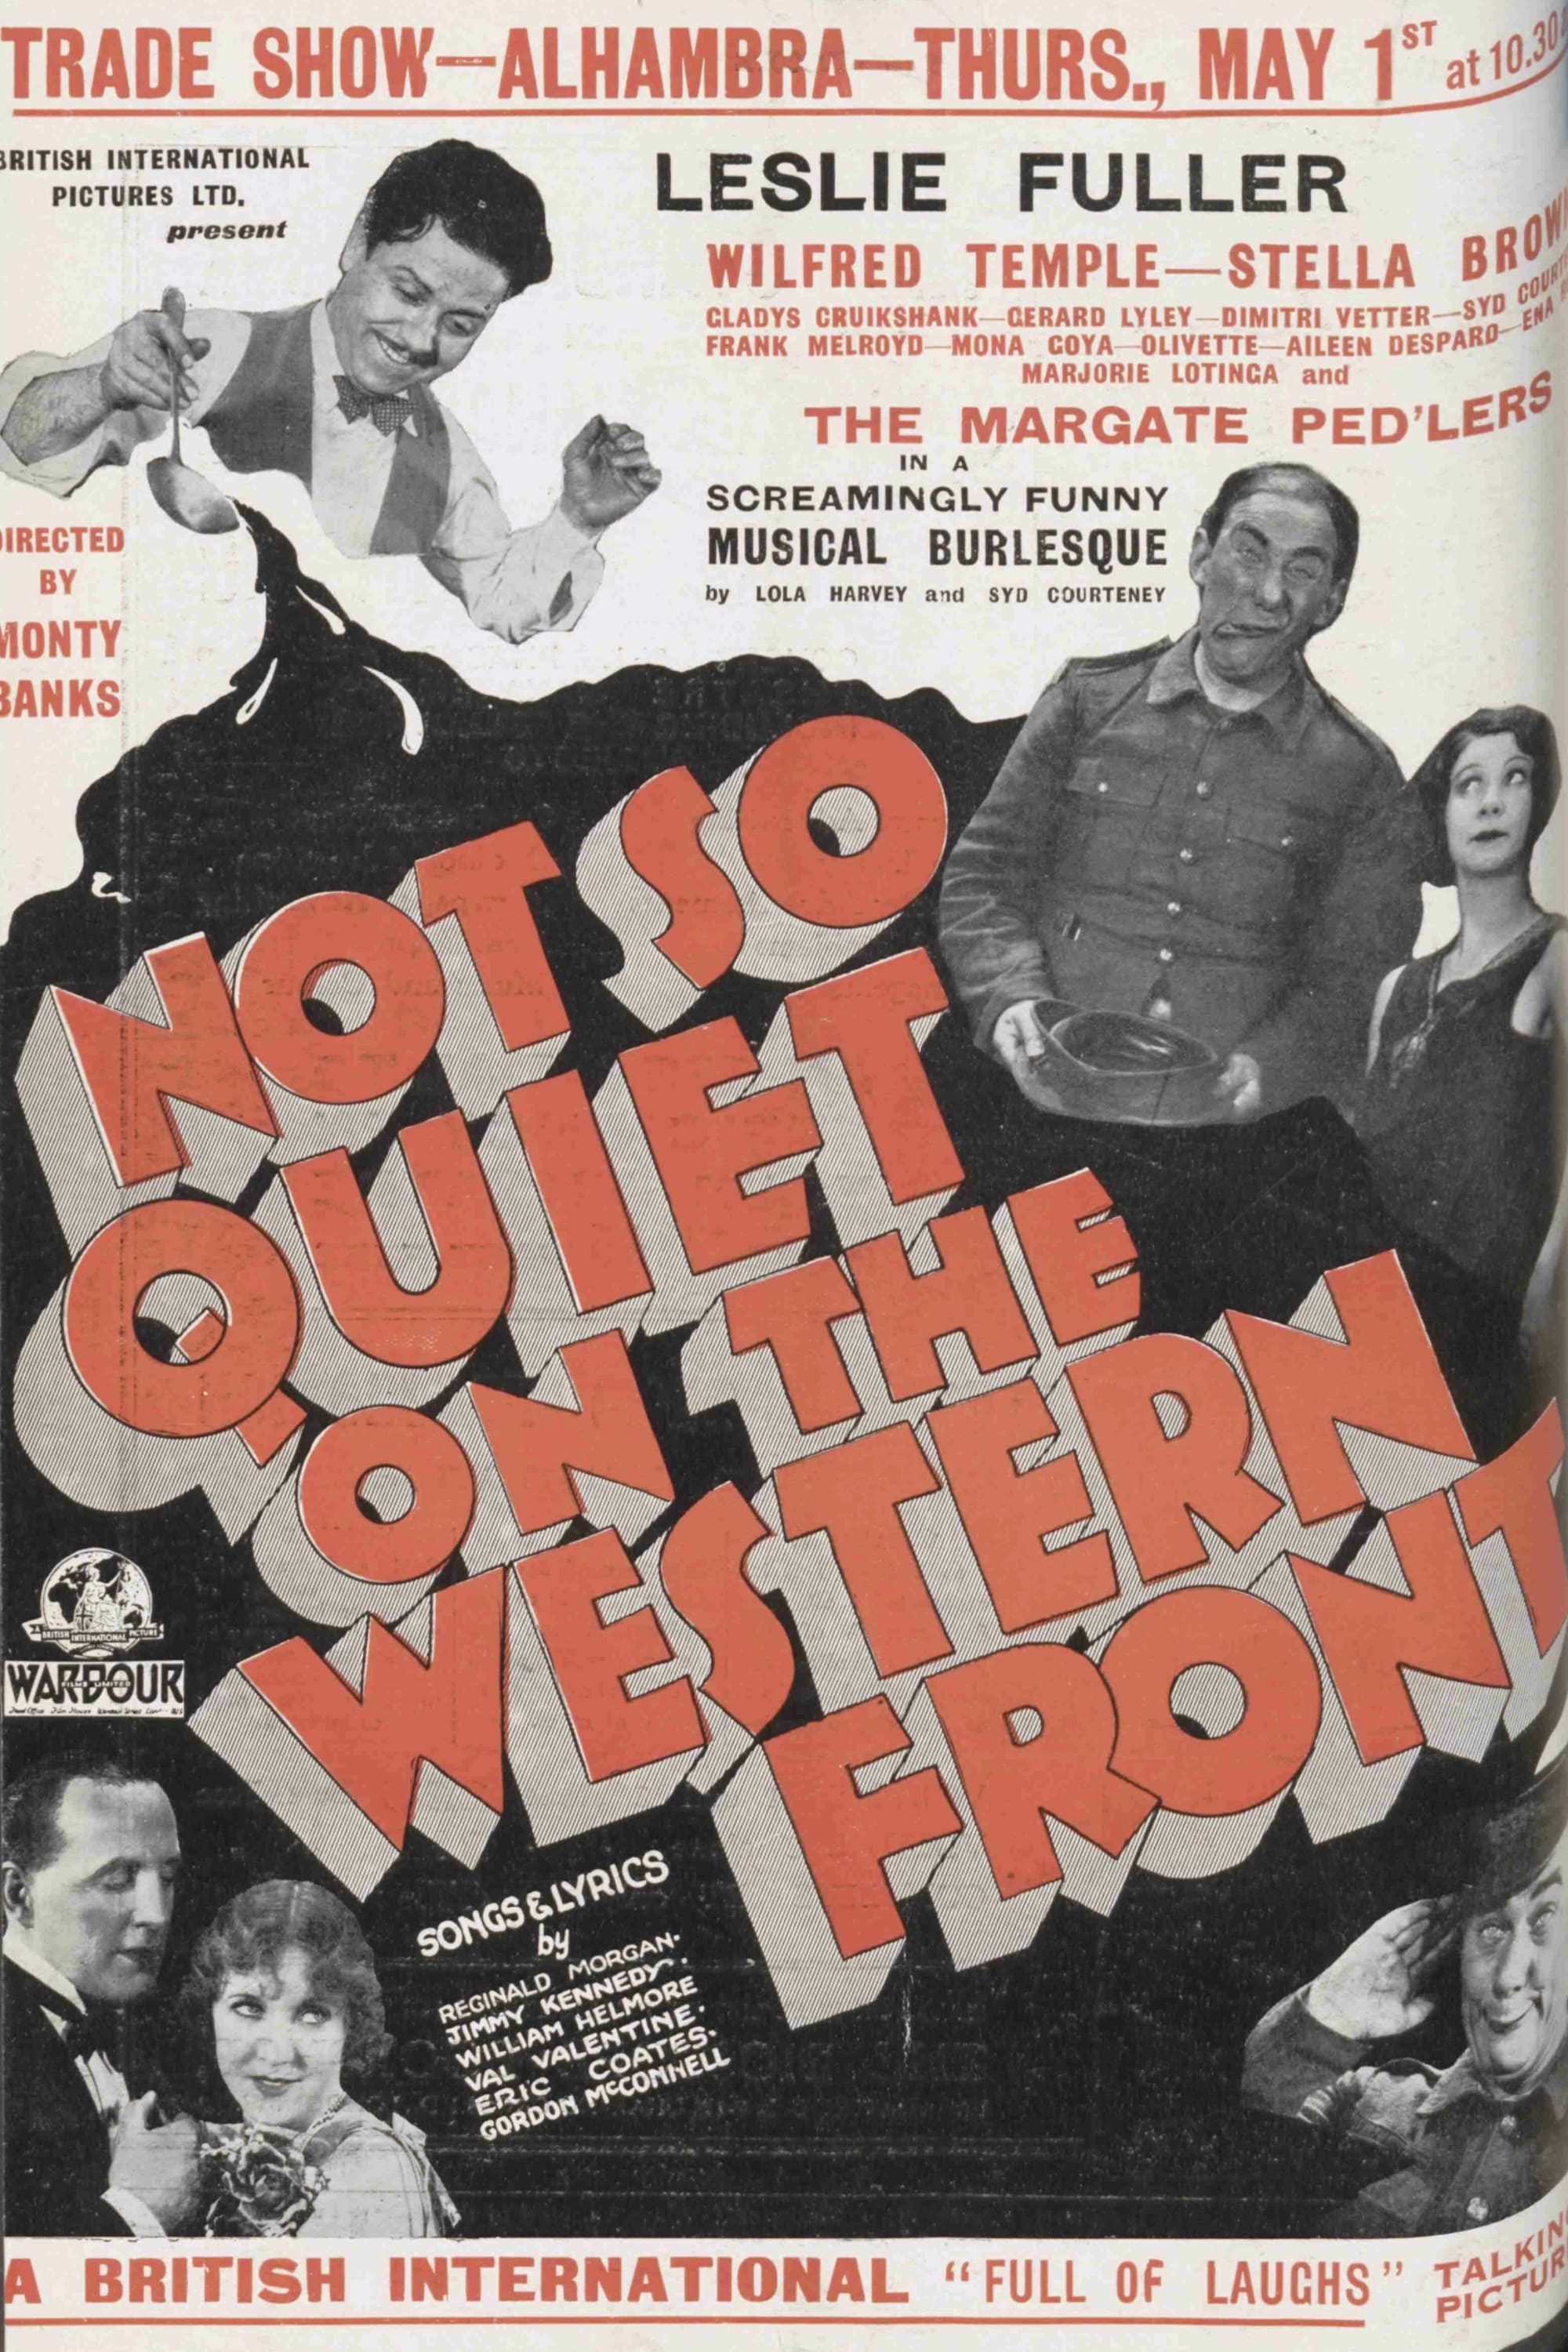 Not So Quiet on the Western Front